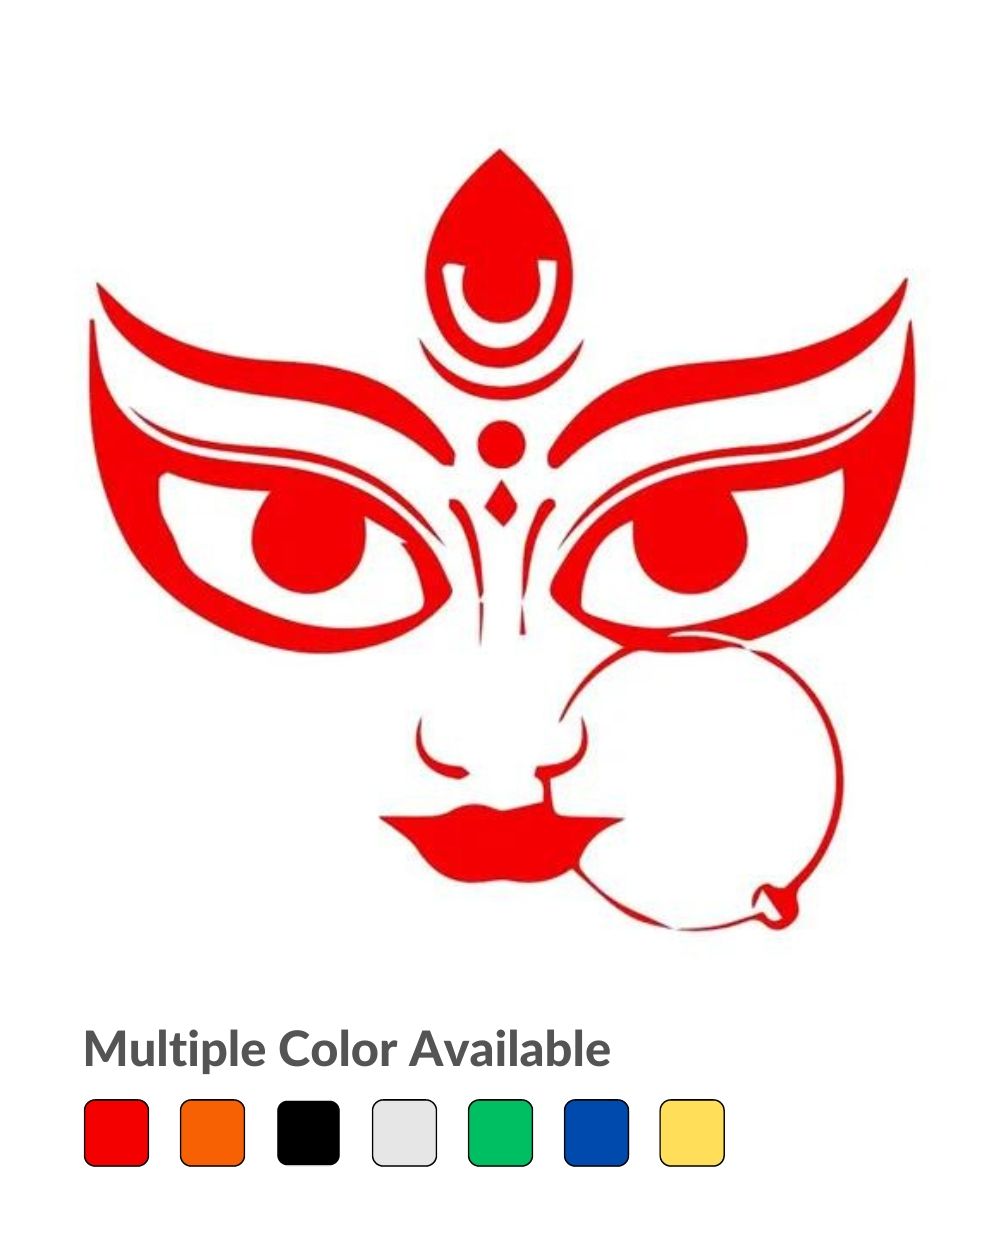 How to Draw Navratri goddess Durga Puja Drawing Step by Step for Kids -  video Dailymotion